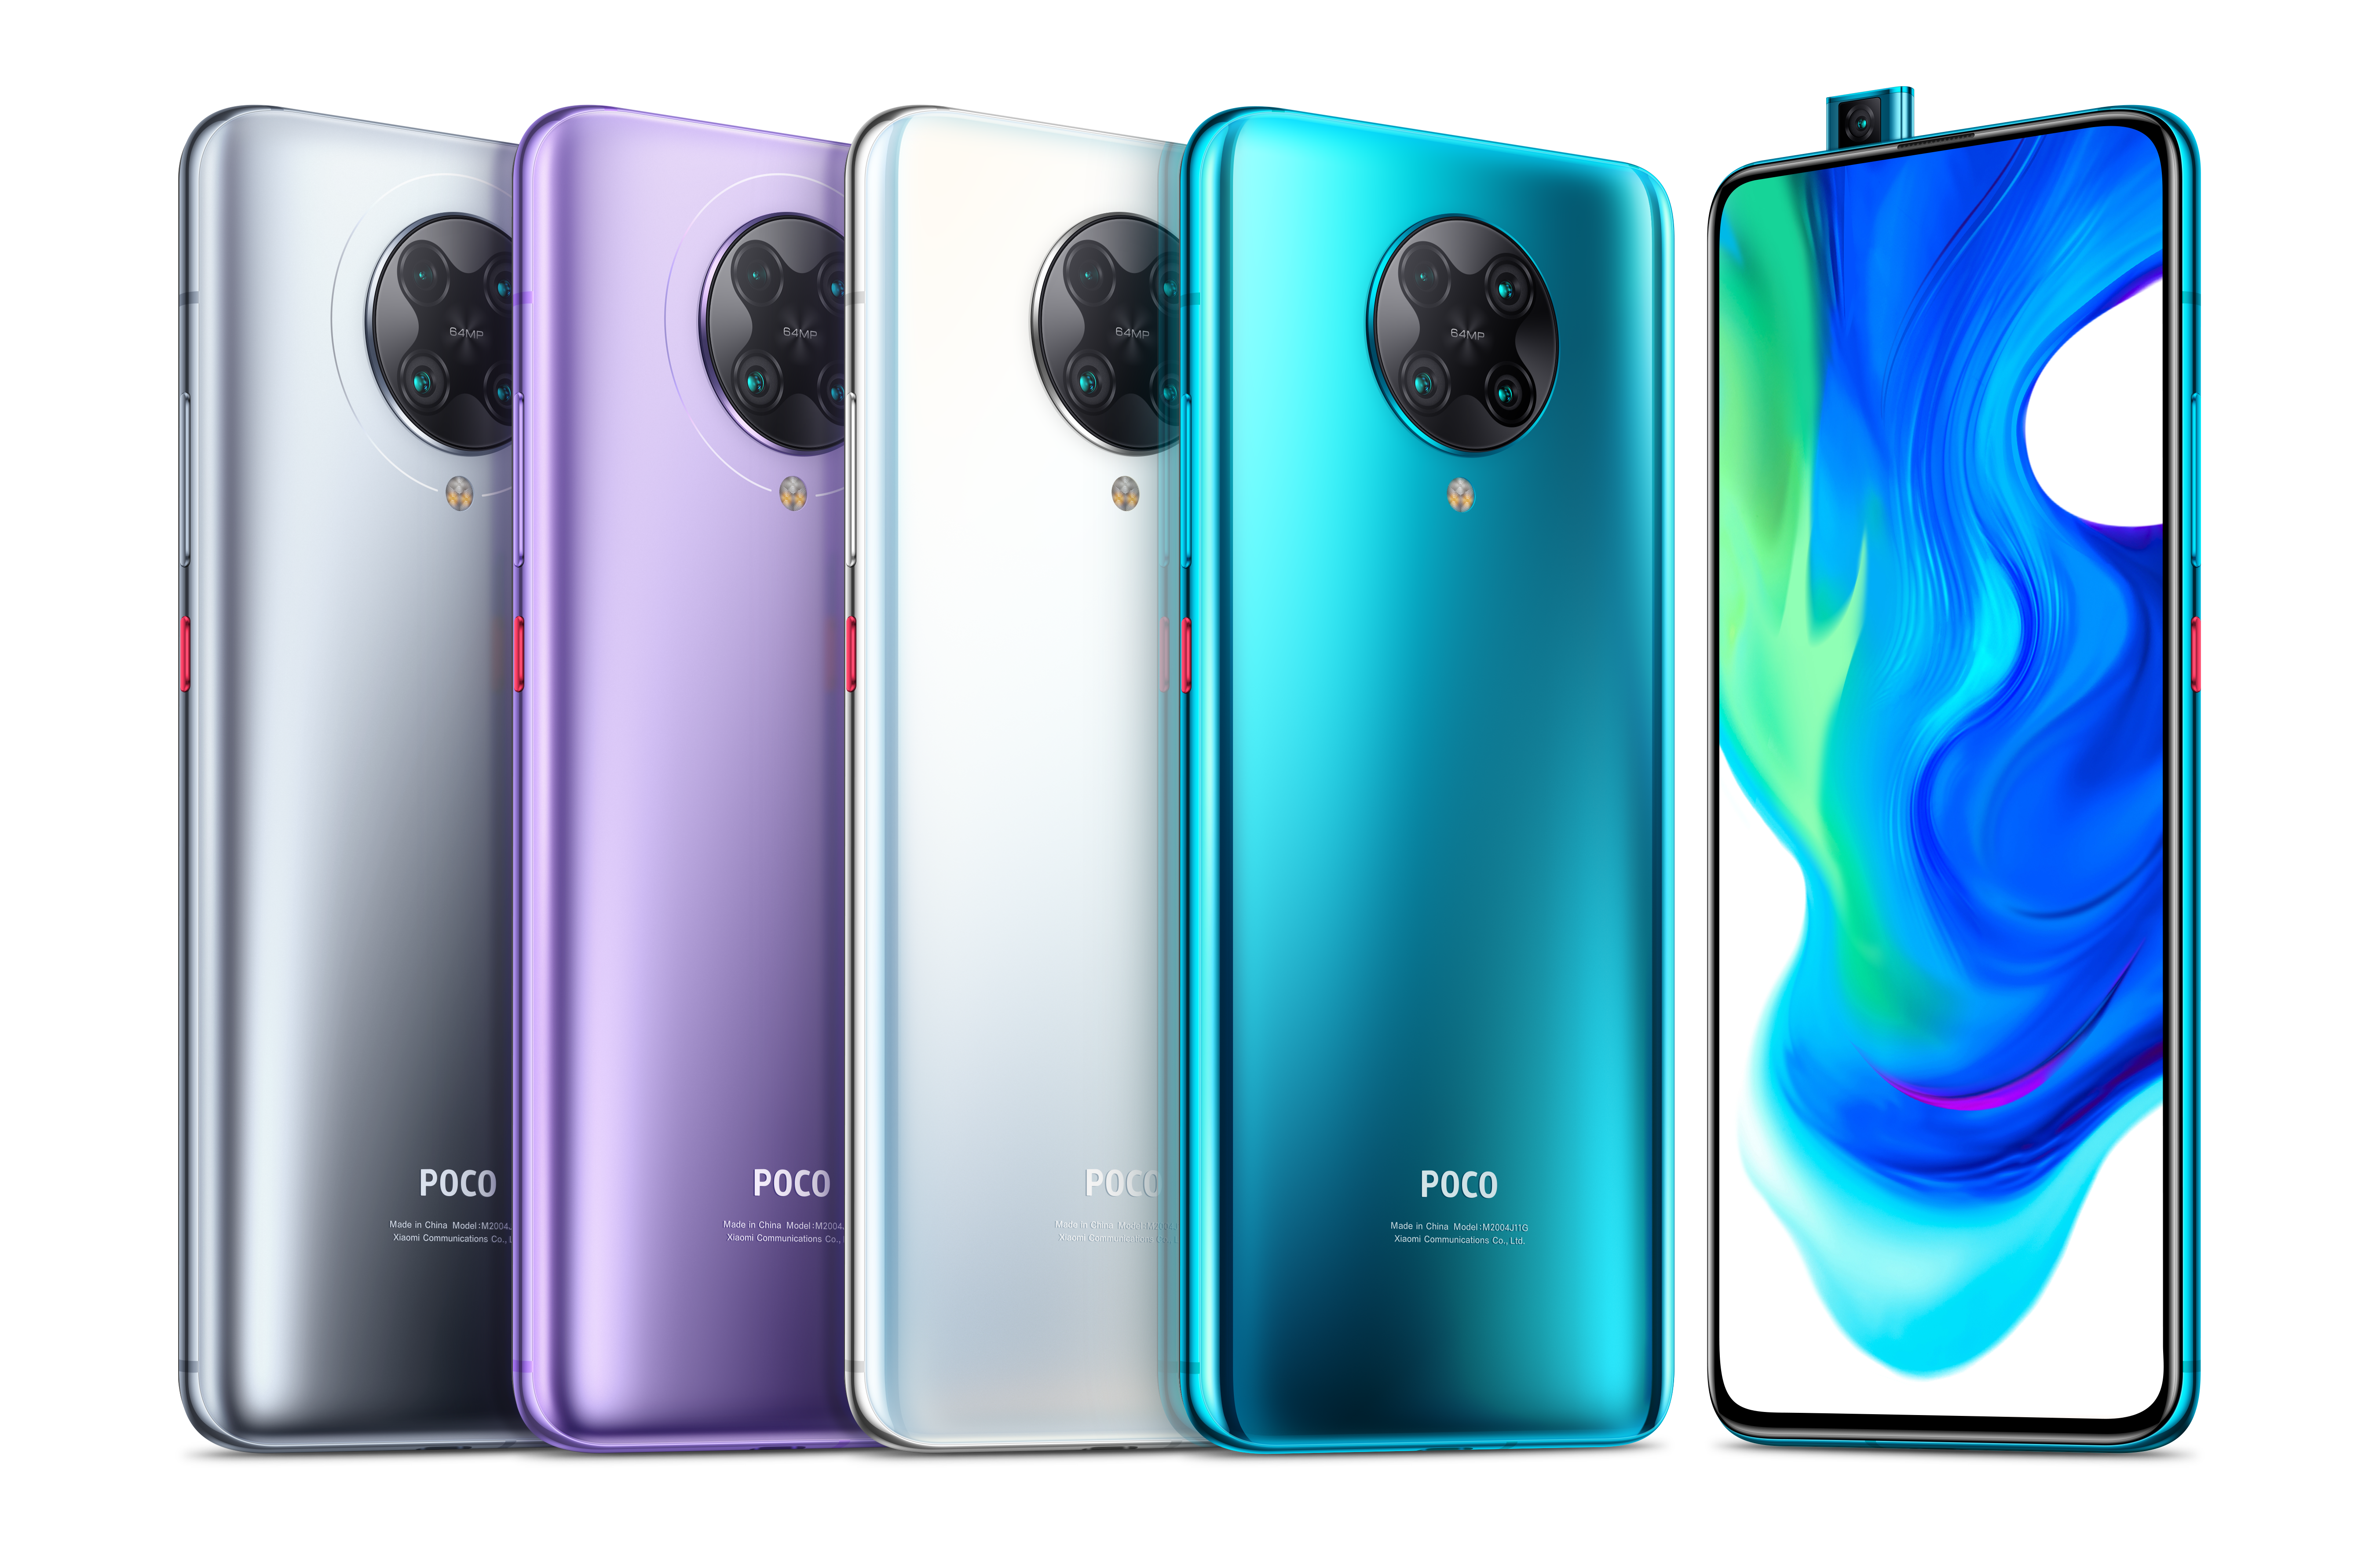 poco f2 pro bags miui 12.5 global stable update